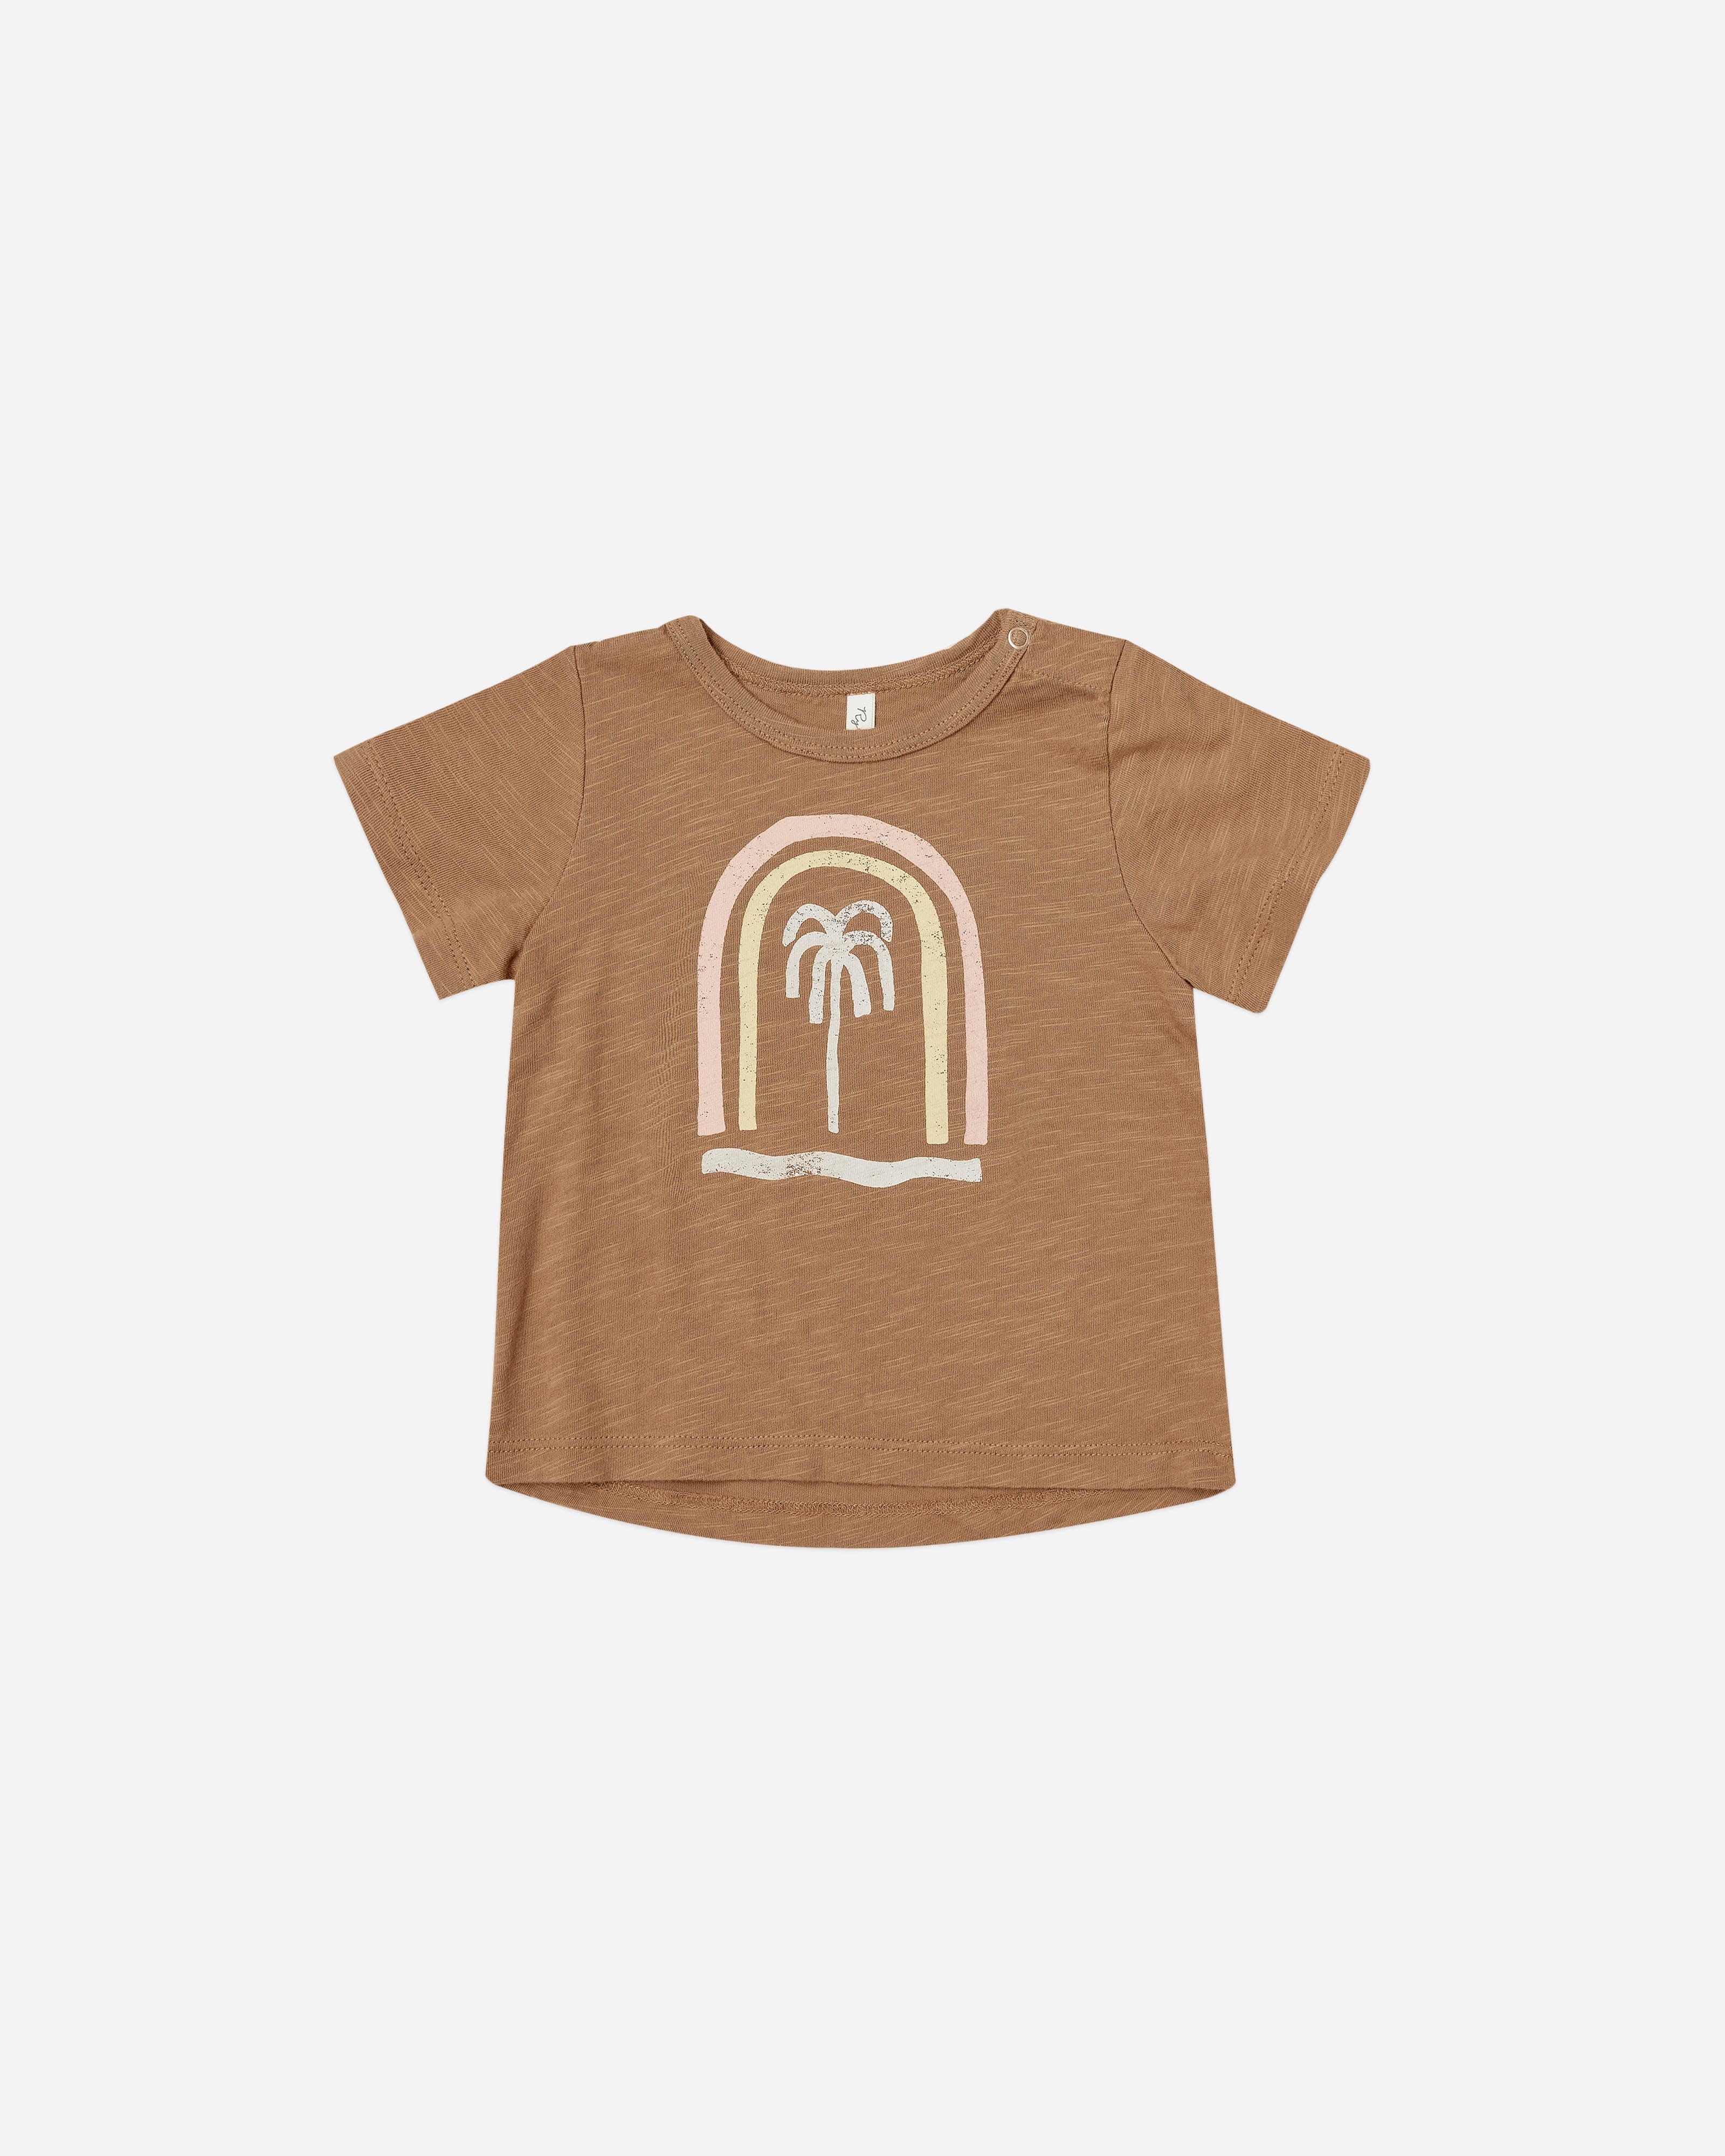 basic tee || palm tree - Rylee + Cru | Kids Clothes | Trendy Baby Clothes | Modern Infant Outfits |